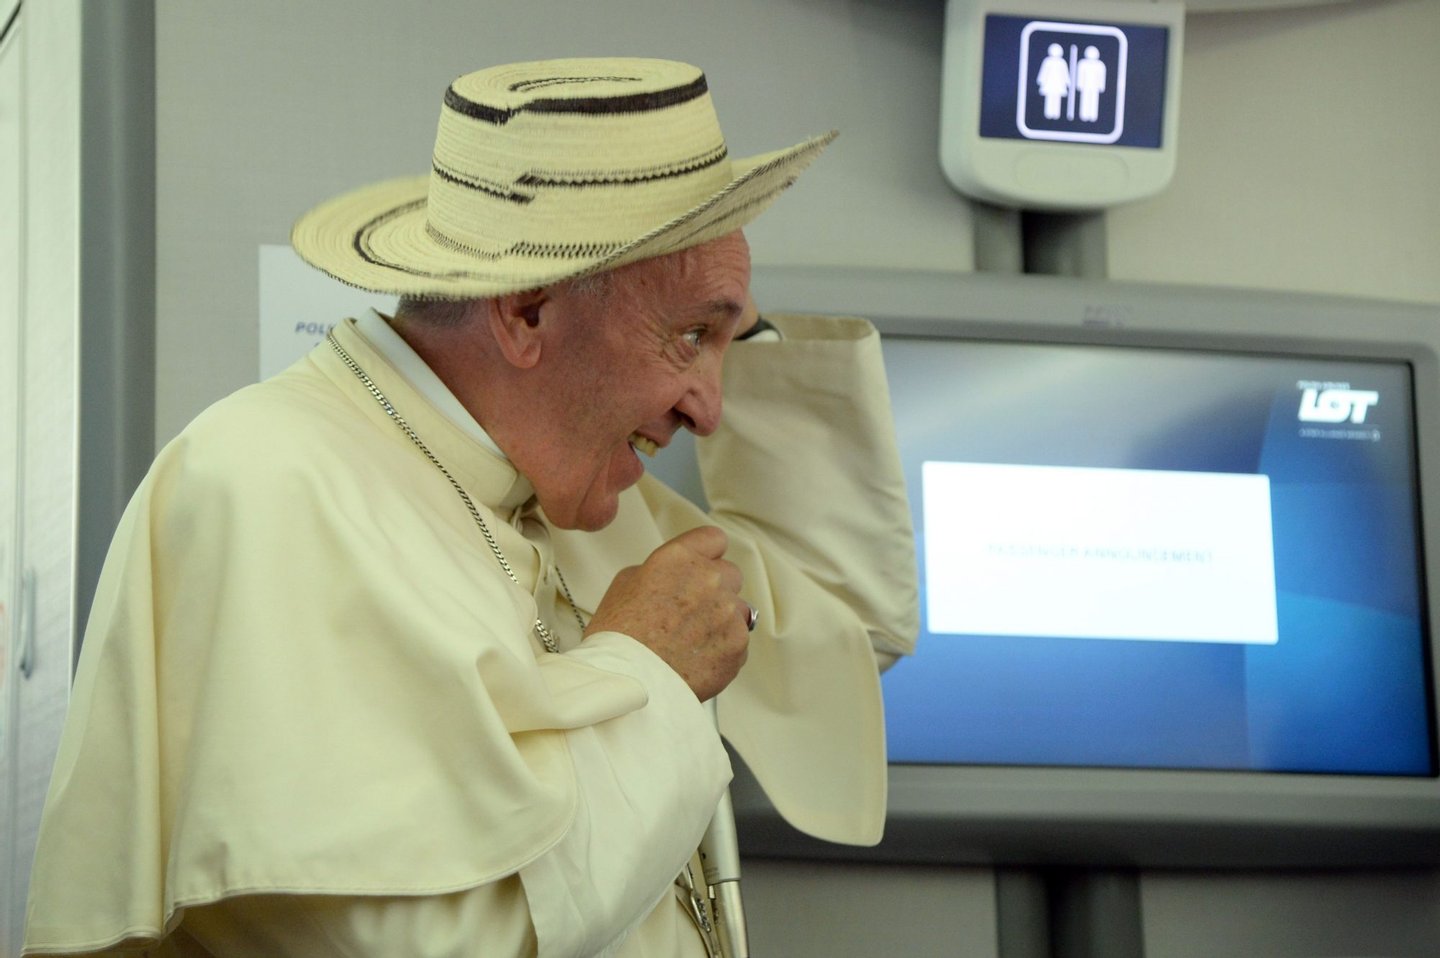 Pope Francis reacts while wearing a hat during a press conference on the plane after his visit to Krakow for the World Youth Days, on July 31, 2016. Pope Francis celebrated mass on July 31, 2016 with over 1.5 million pilgrims in a vast sun-drenched field in Poland, wrapping up an emotionally charged trip with some choice technological metaphors. In a nod to today's internet-dominated world, Francis urged the faithful, who had travelled to Poland from all over the world, to "download the best link of all, that of a heart which sees and transmits goodness without growing weary". / AFP / POOL AND AFP / Filippo MONTEFORTE (Photo credit should read FILIPPO MONTEFORTE/AFP/Getty Images)